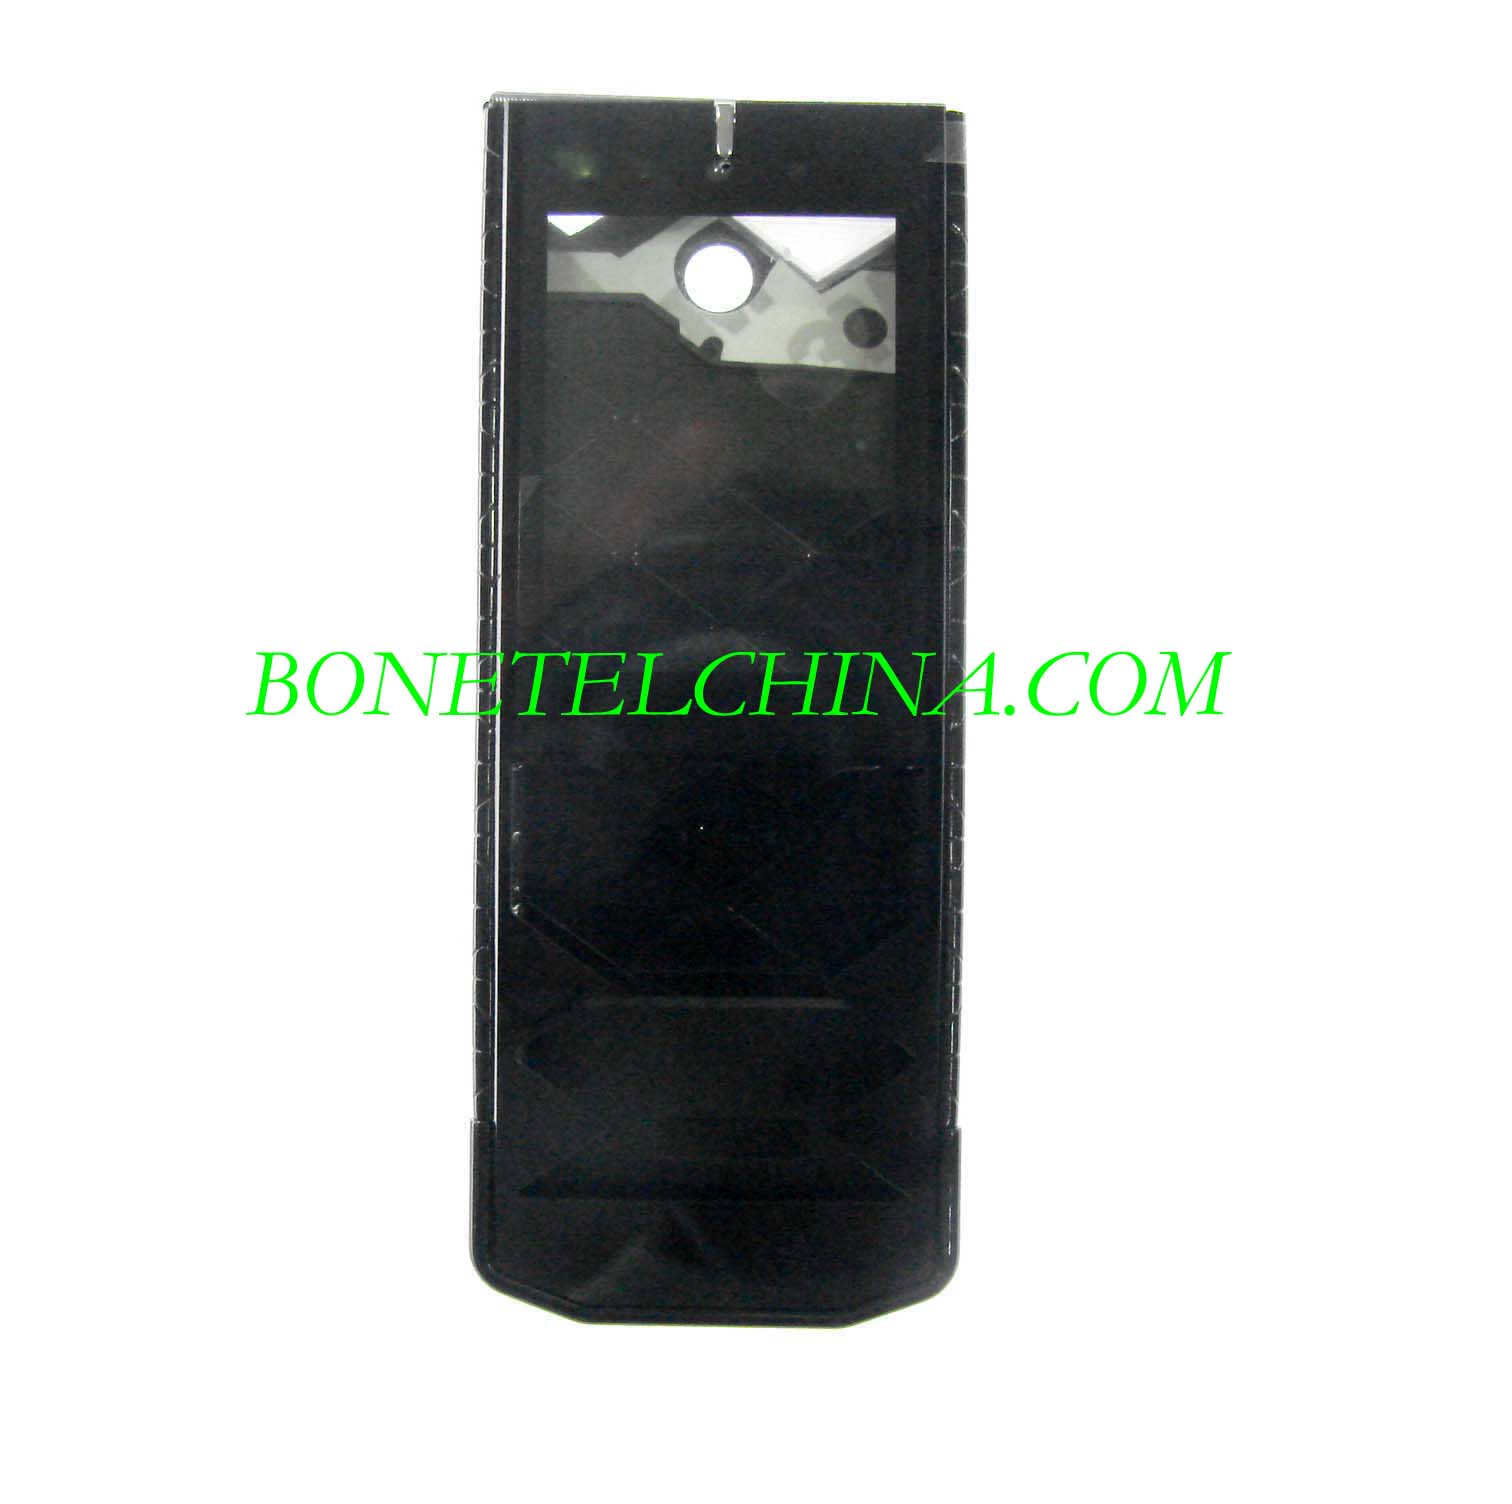 Mobile phone housing for Nokia 7900